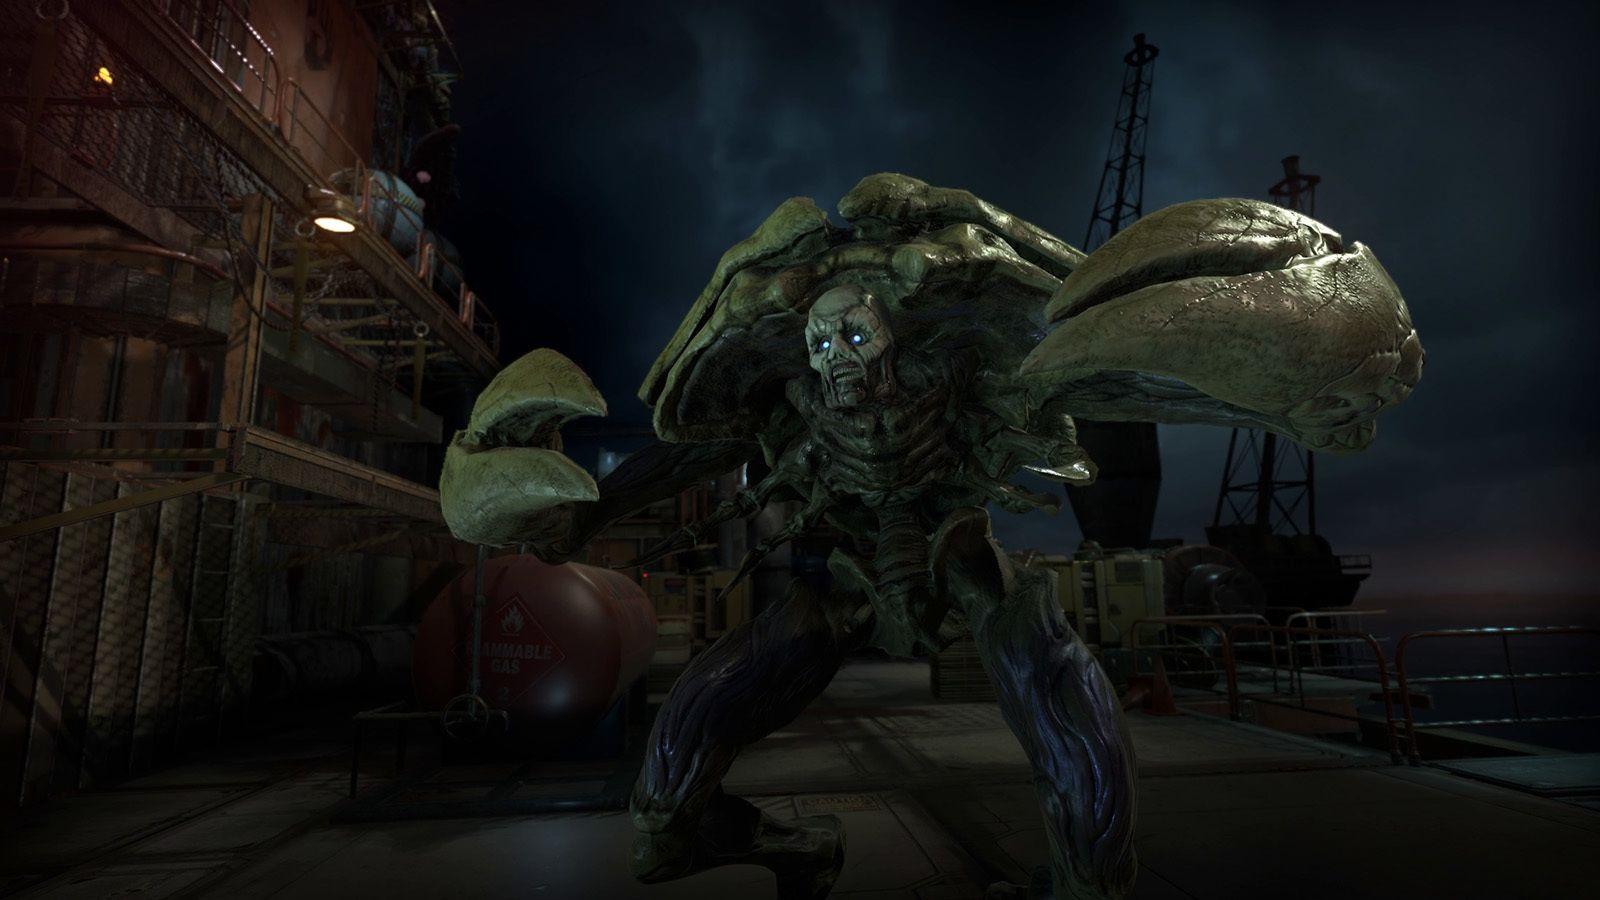 Phoenix Point is coming in Q4 2018